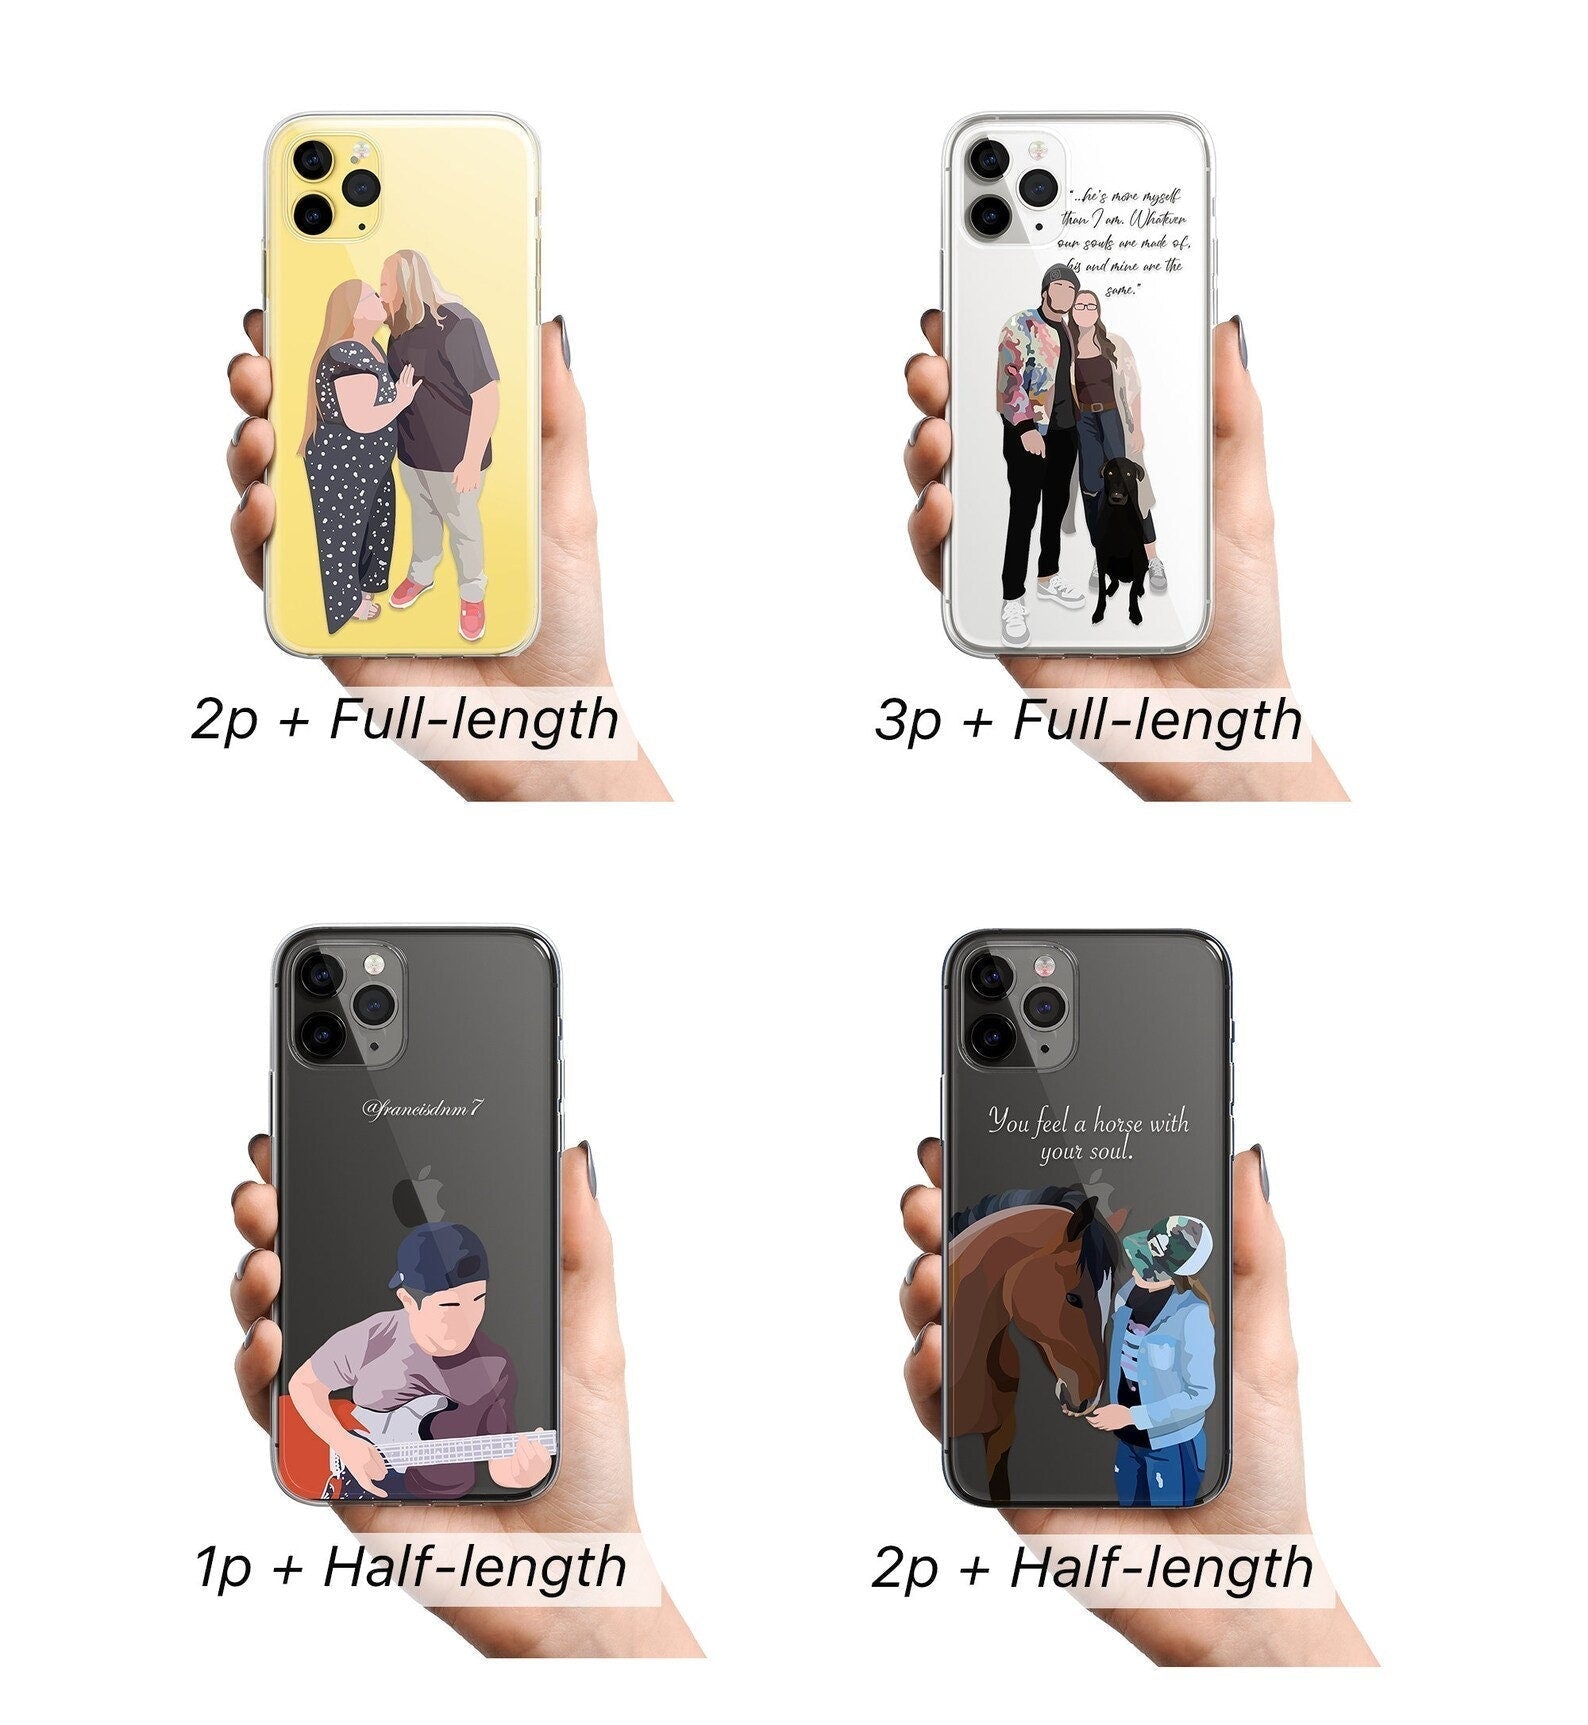 Horse Playing Art Painting Custom Phone Case Cover For iPhone